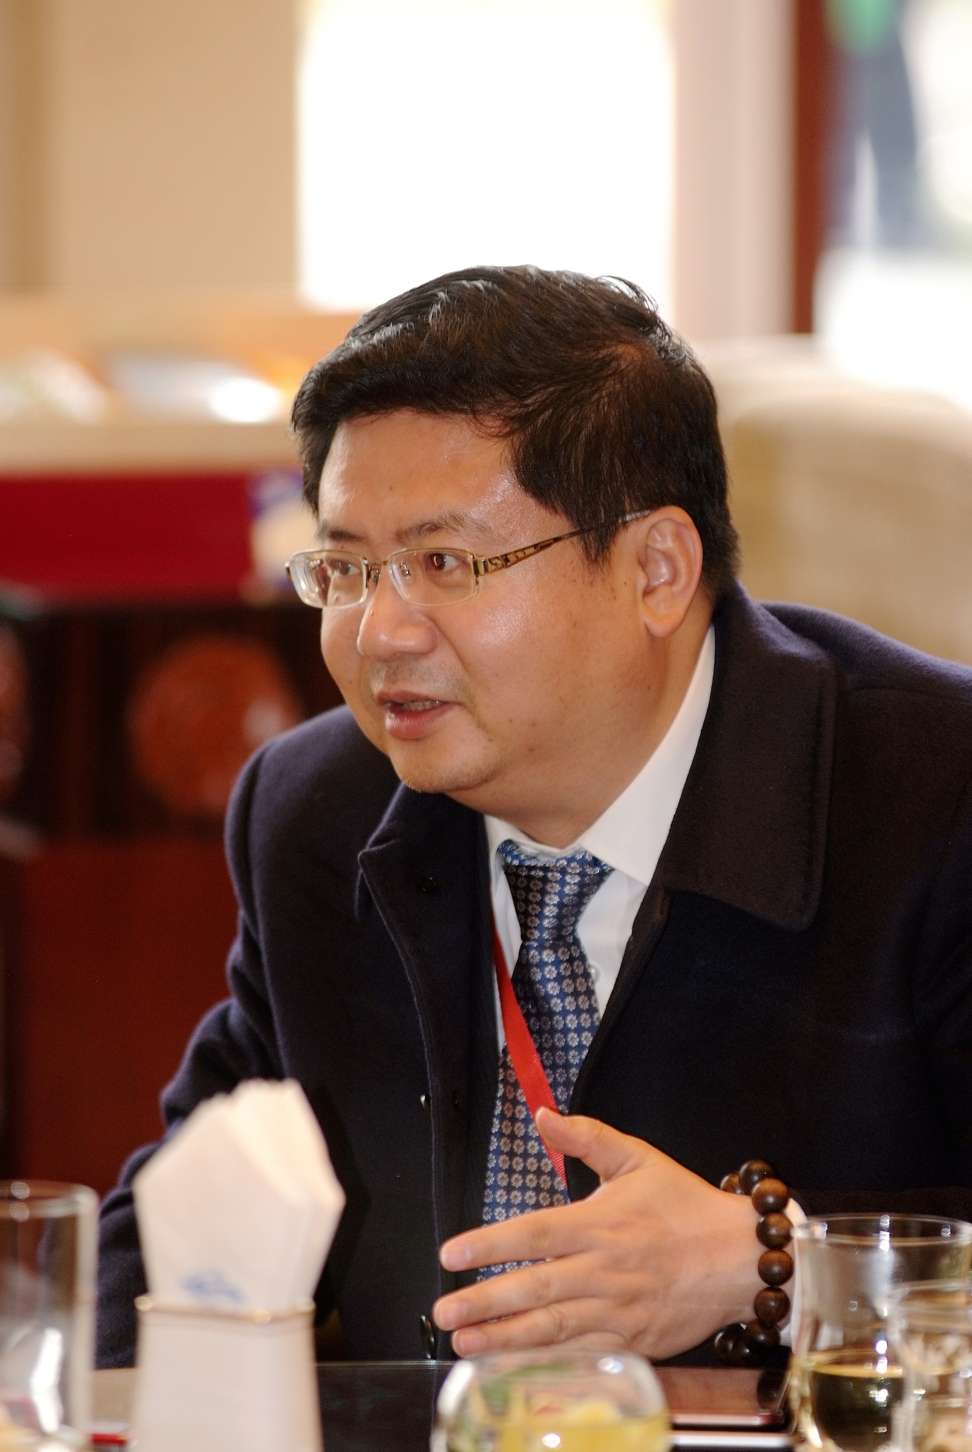 Qiu Haibin says Orient Ruichen differs from many real estate private equity funds in that it has a large property development operation and employs over 500 people. Photo: Handout